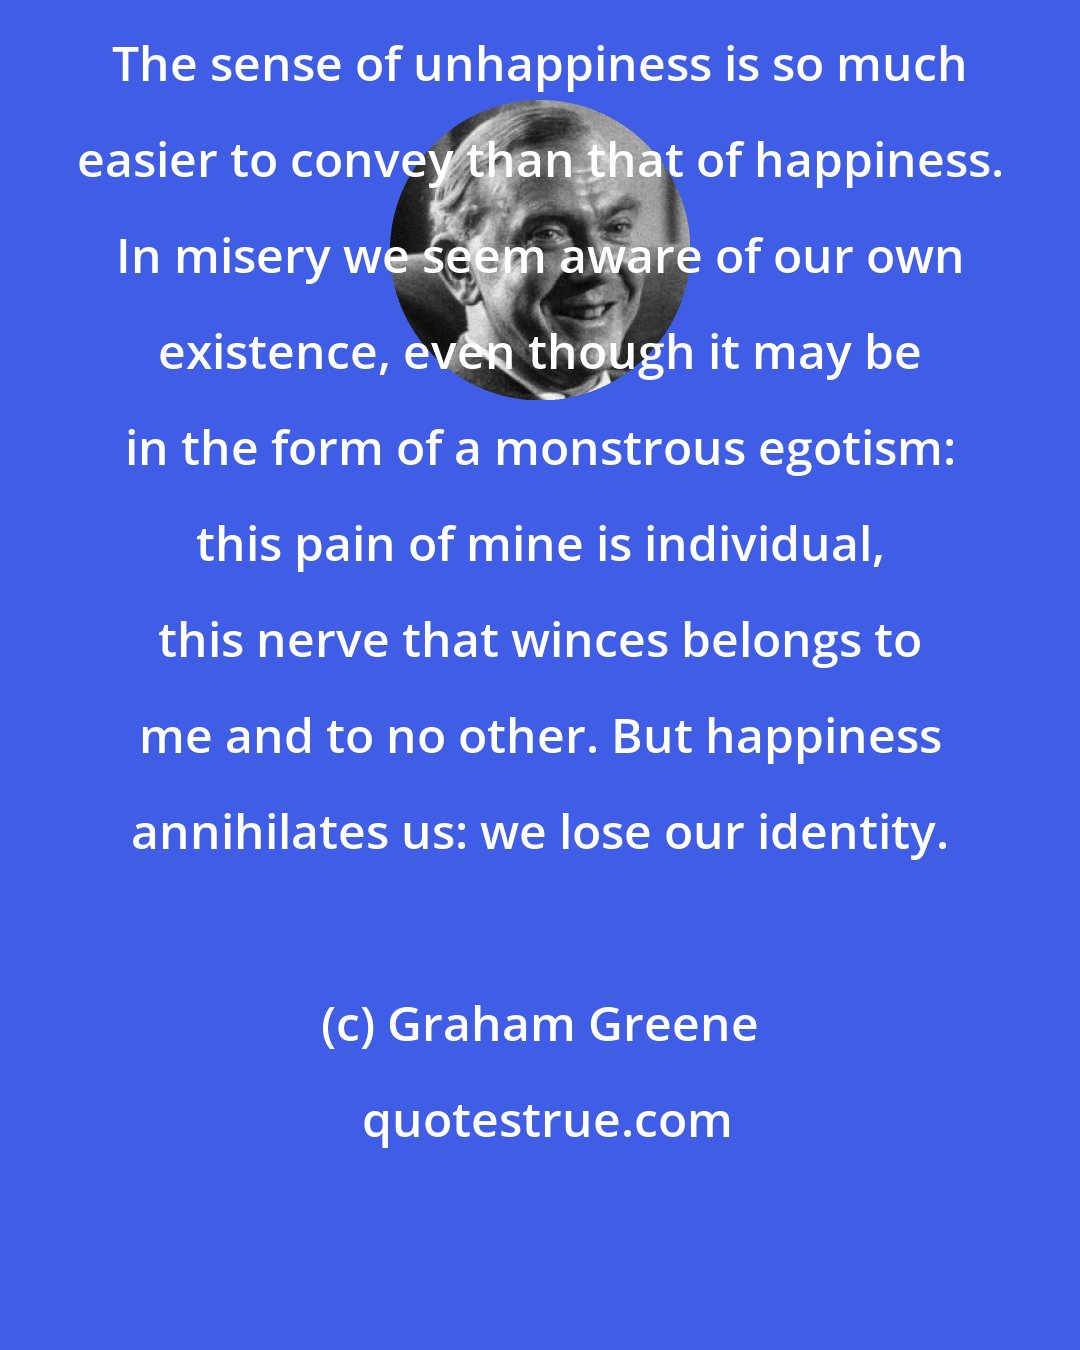 Graham Greene: The sense of unhappiness is so much easier to convey than that of happiness. In misery we seem aware of our own existence, even though it may be in the form of a monstrous egotism: this pain of mine is individual, this nerve that winces belongs to me and to no other. But happiness annihilates us: we lose our identity.